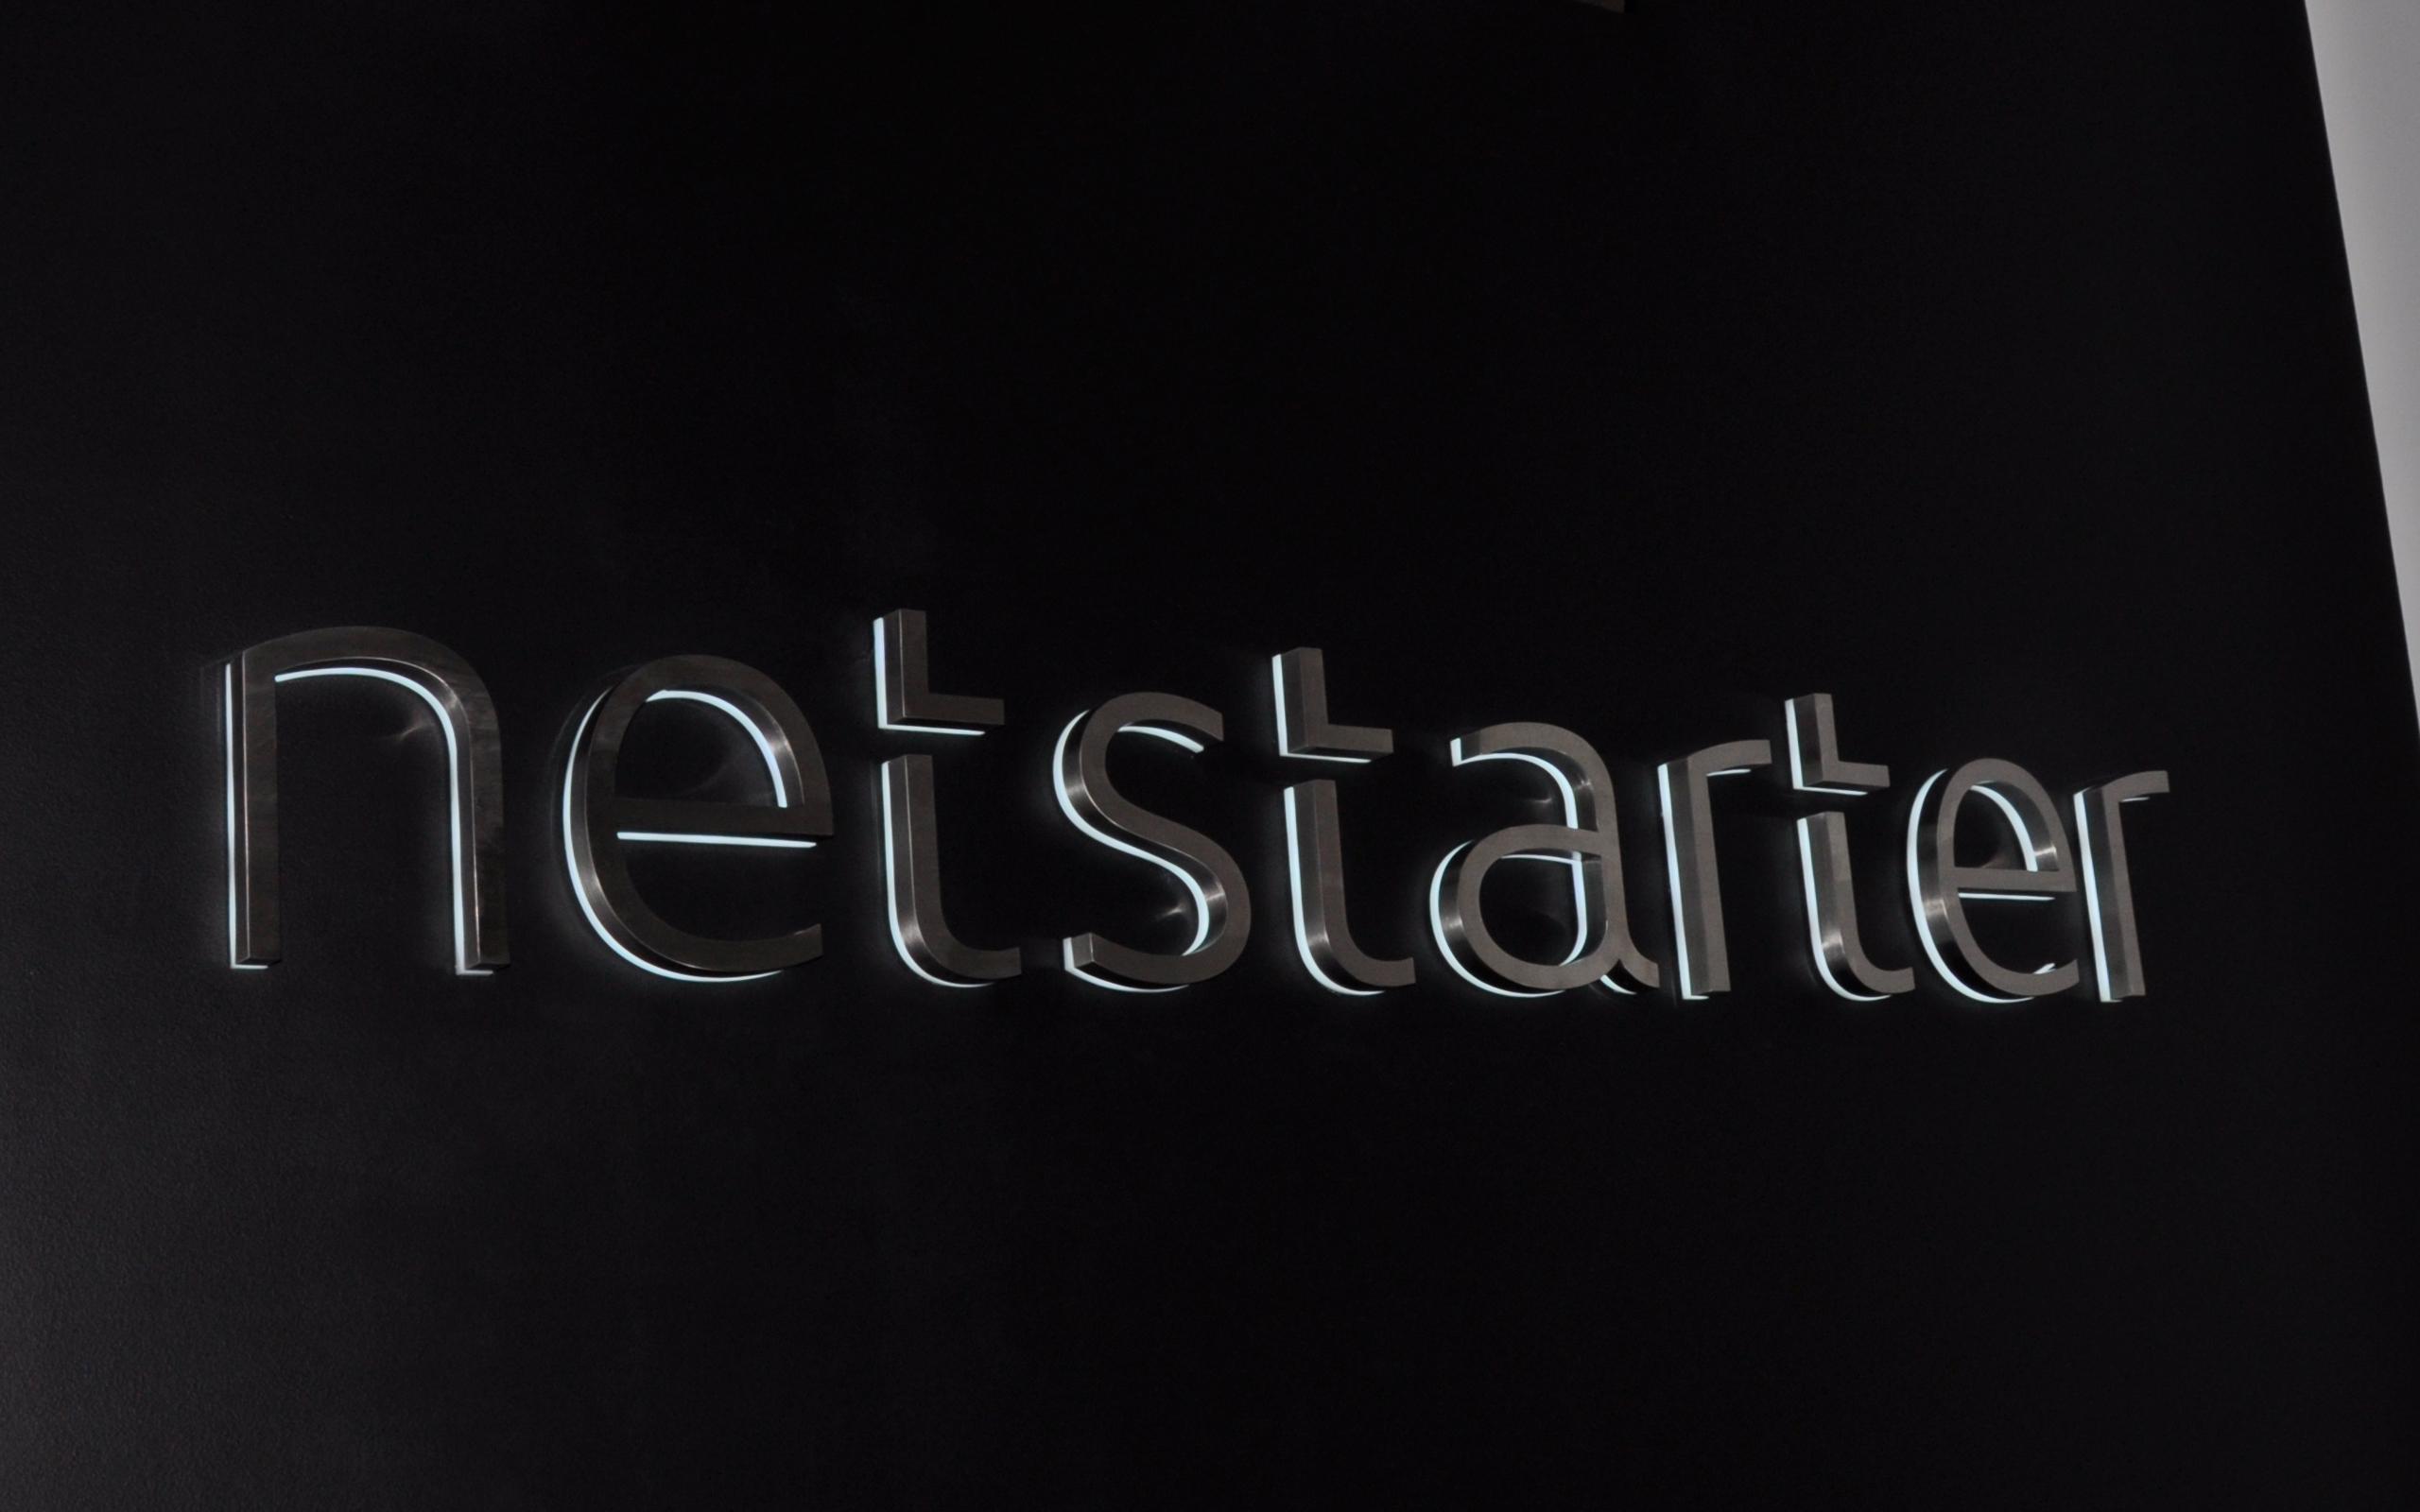 netstarter-large-image-stainless-steel-fabricated-with-glow